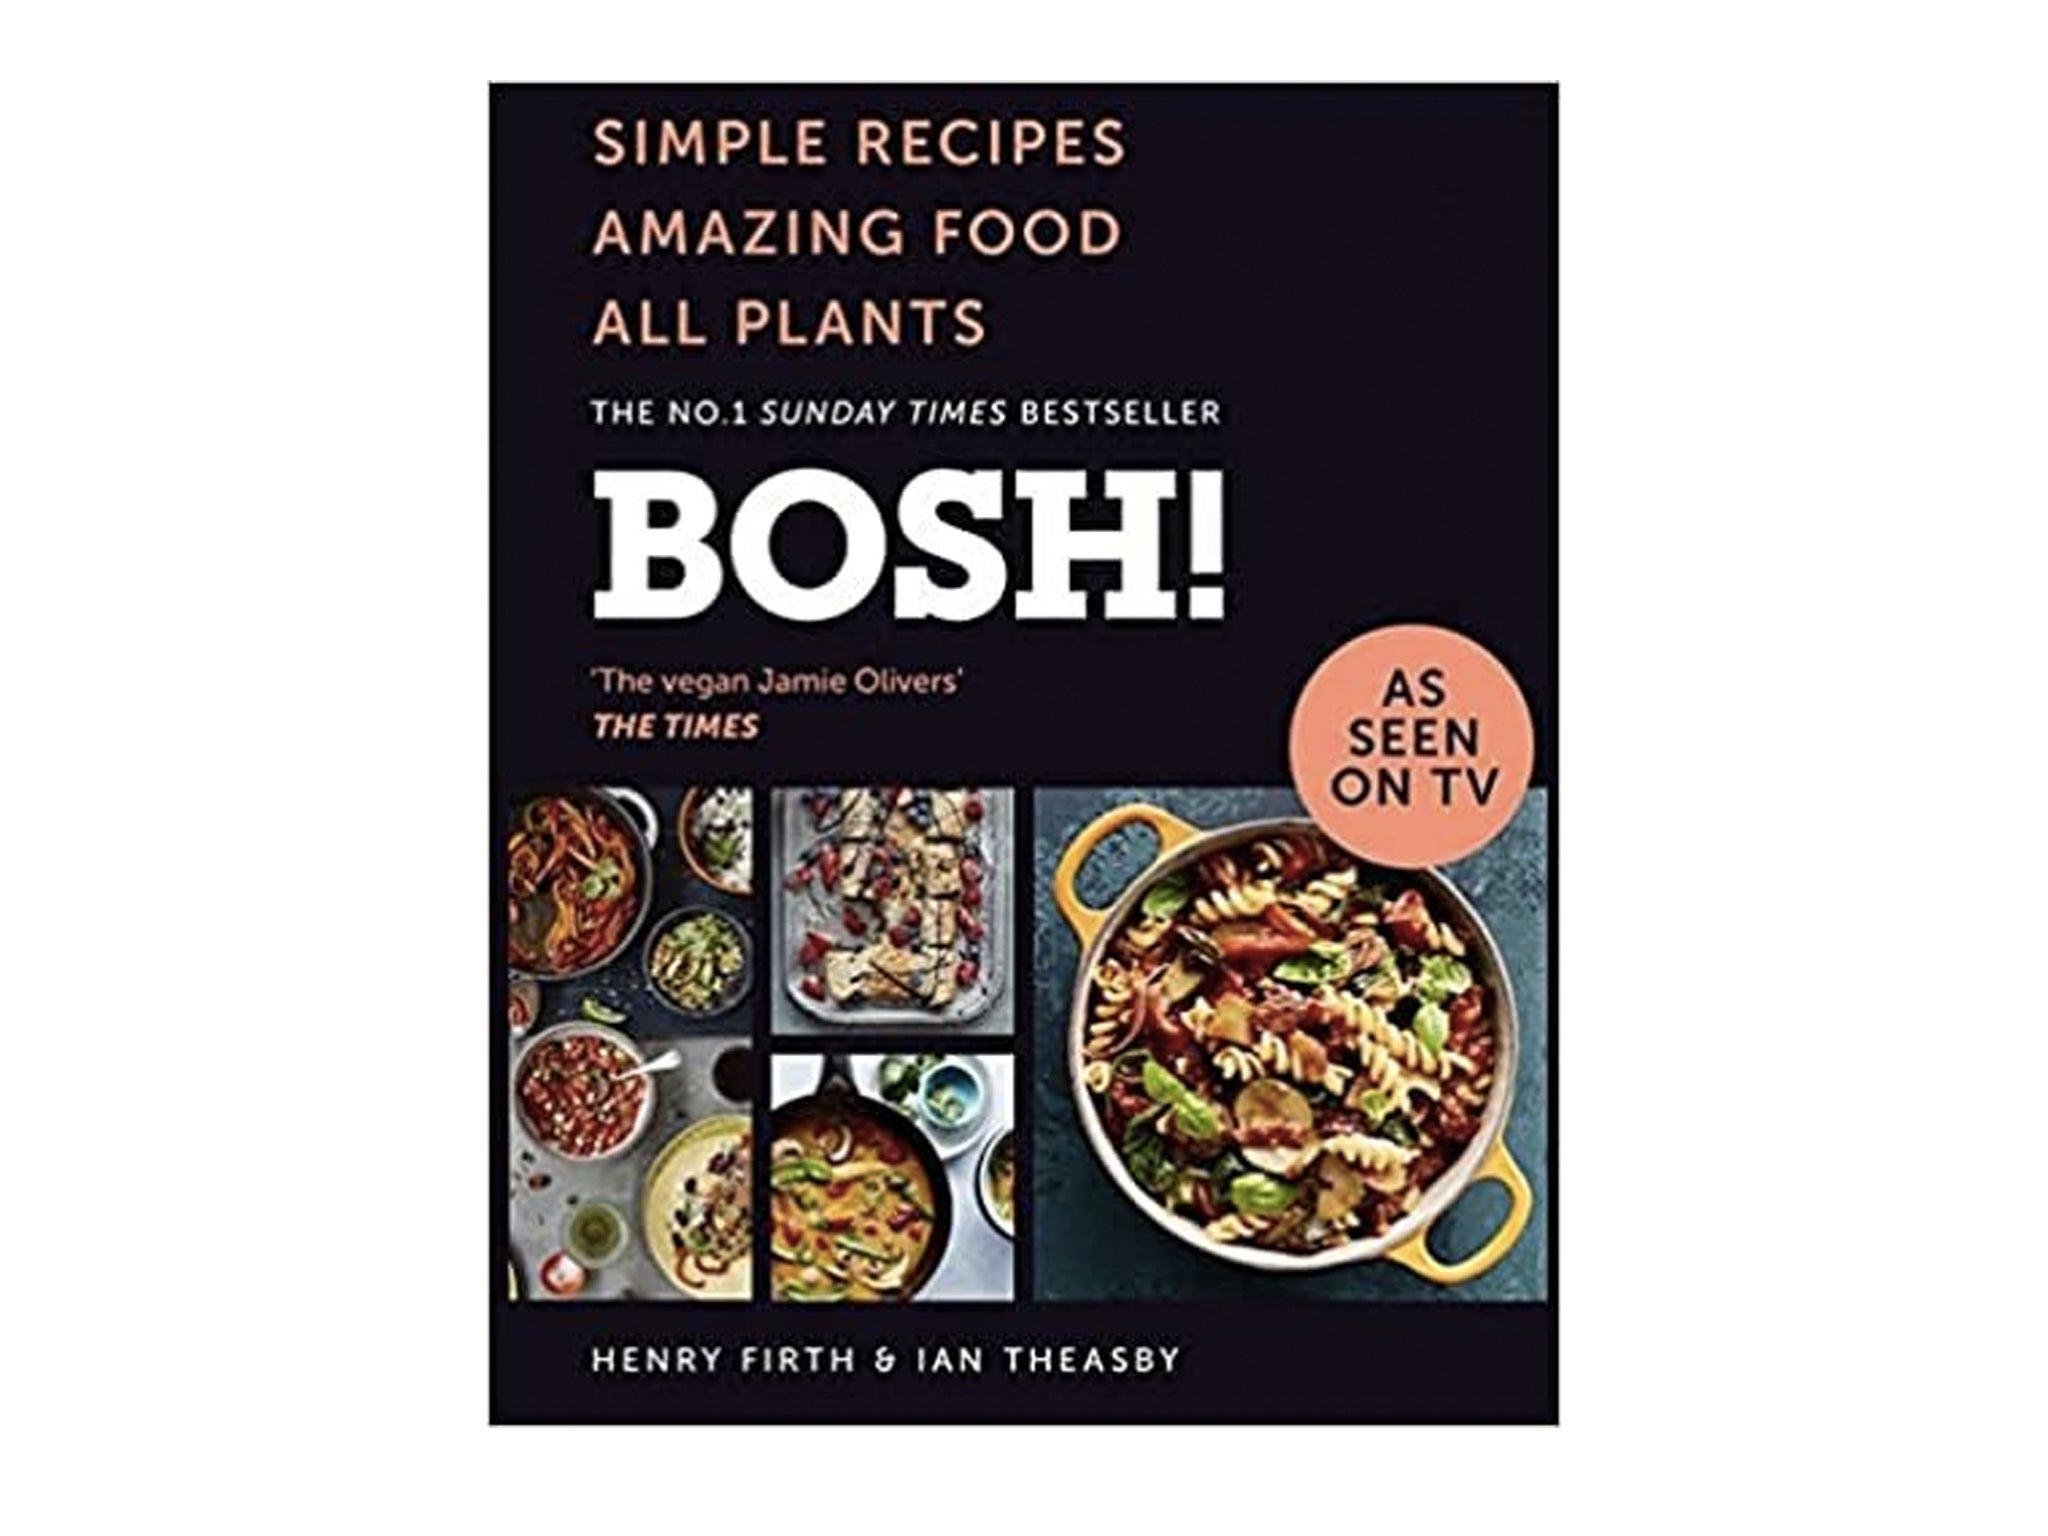 ‘Bosh!’ by Henry Firth and Ian Theasby